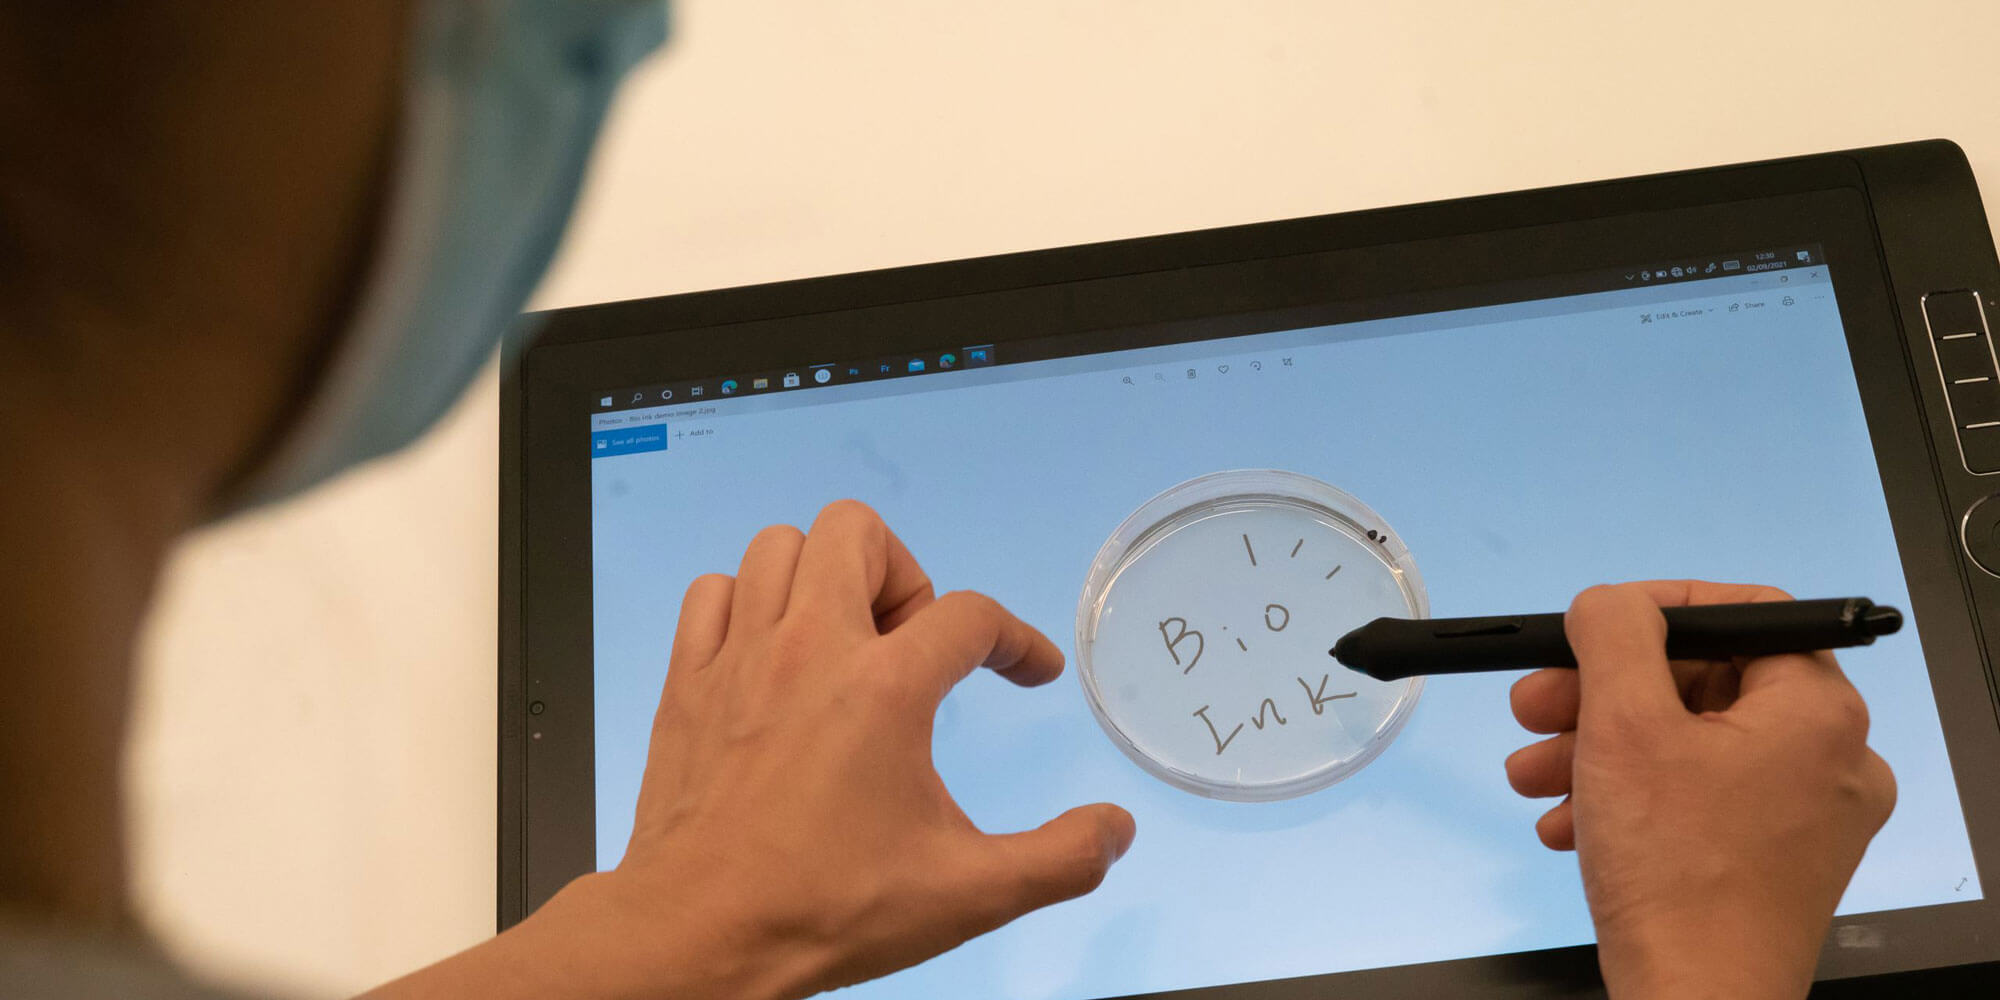 A highly sensitive Wacom tablet makes the characters visible to the naked eye but can also store them digitally. Everything else is taken care of by biological processes from the realm of nature: the living microorganisms expand the human-designed messages into an amazing natural spectacle.